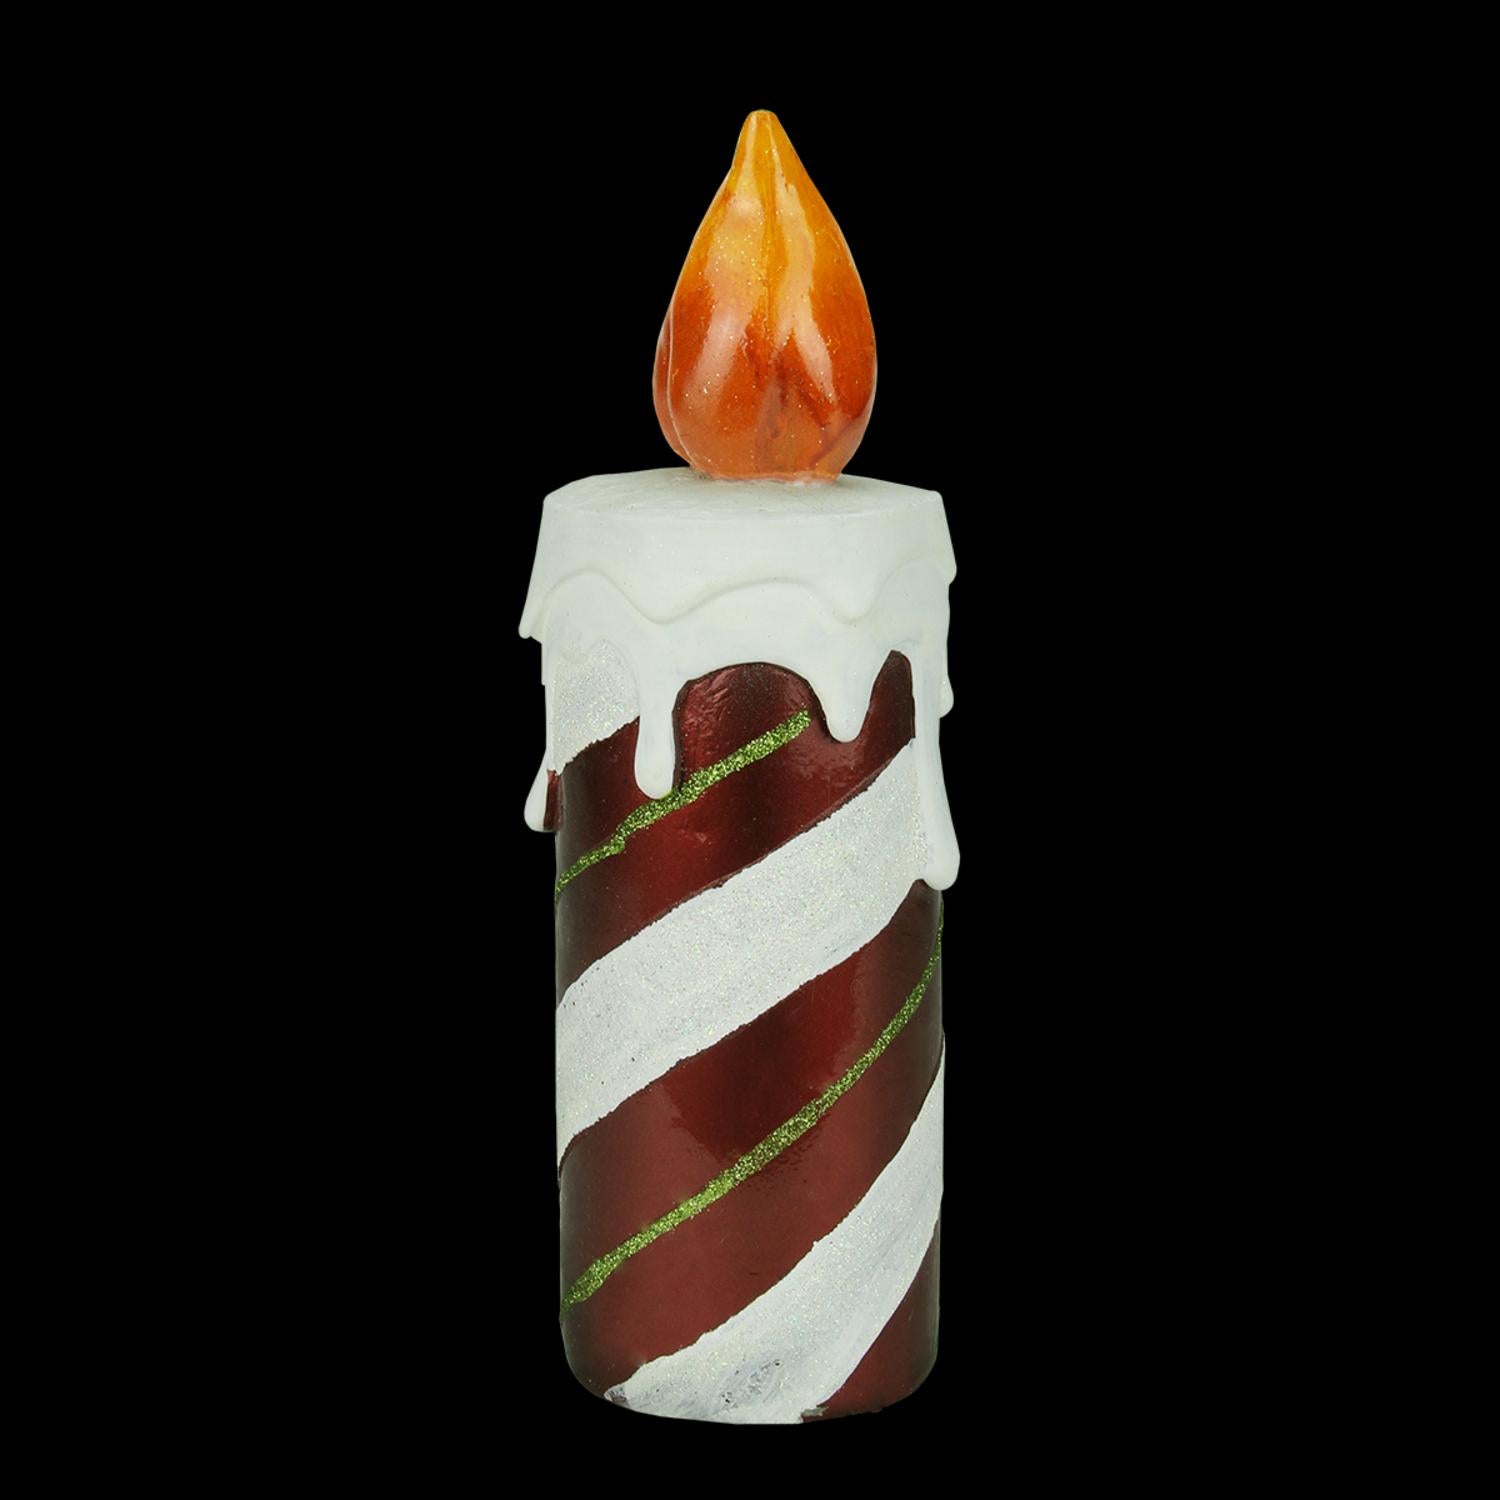 9.75" LED Lighted Festive Candy Cane Striped Candle Christmas Decoration